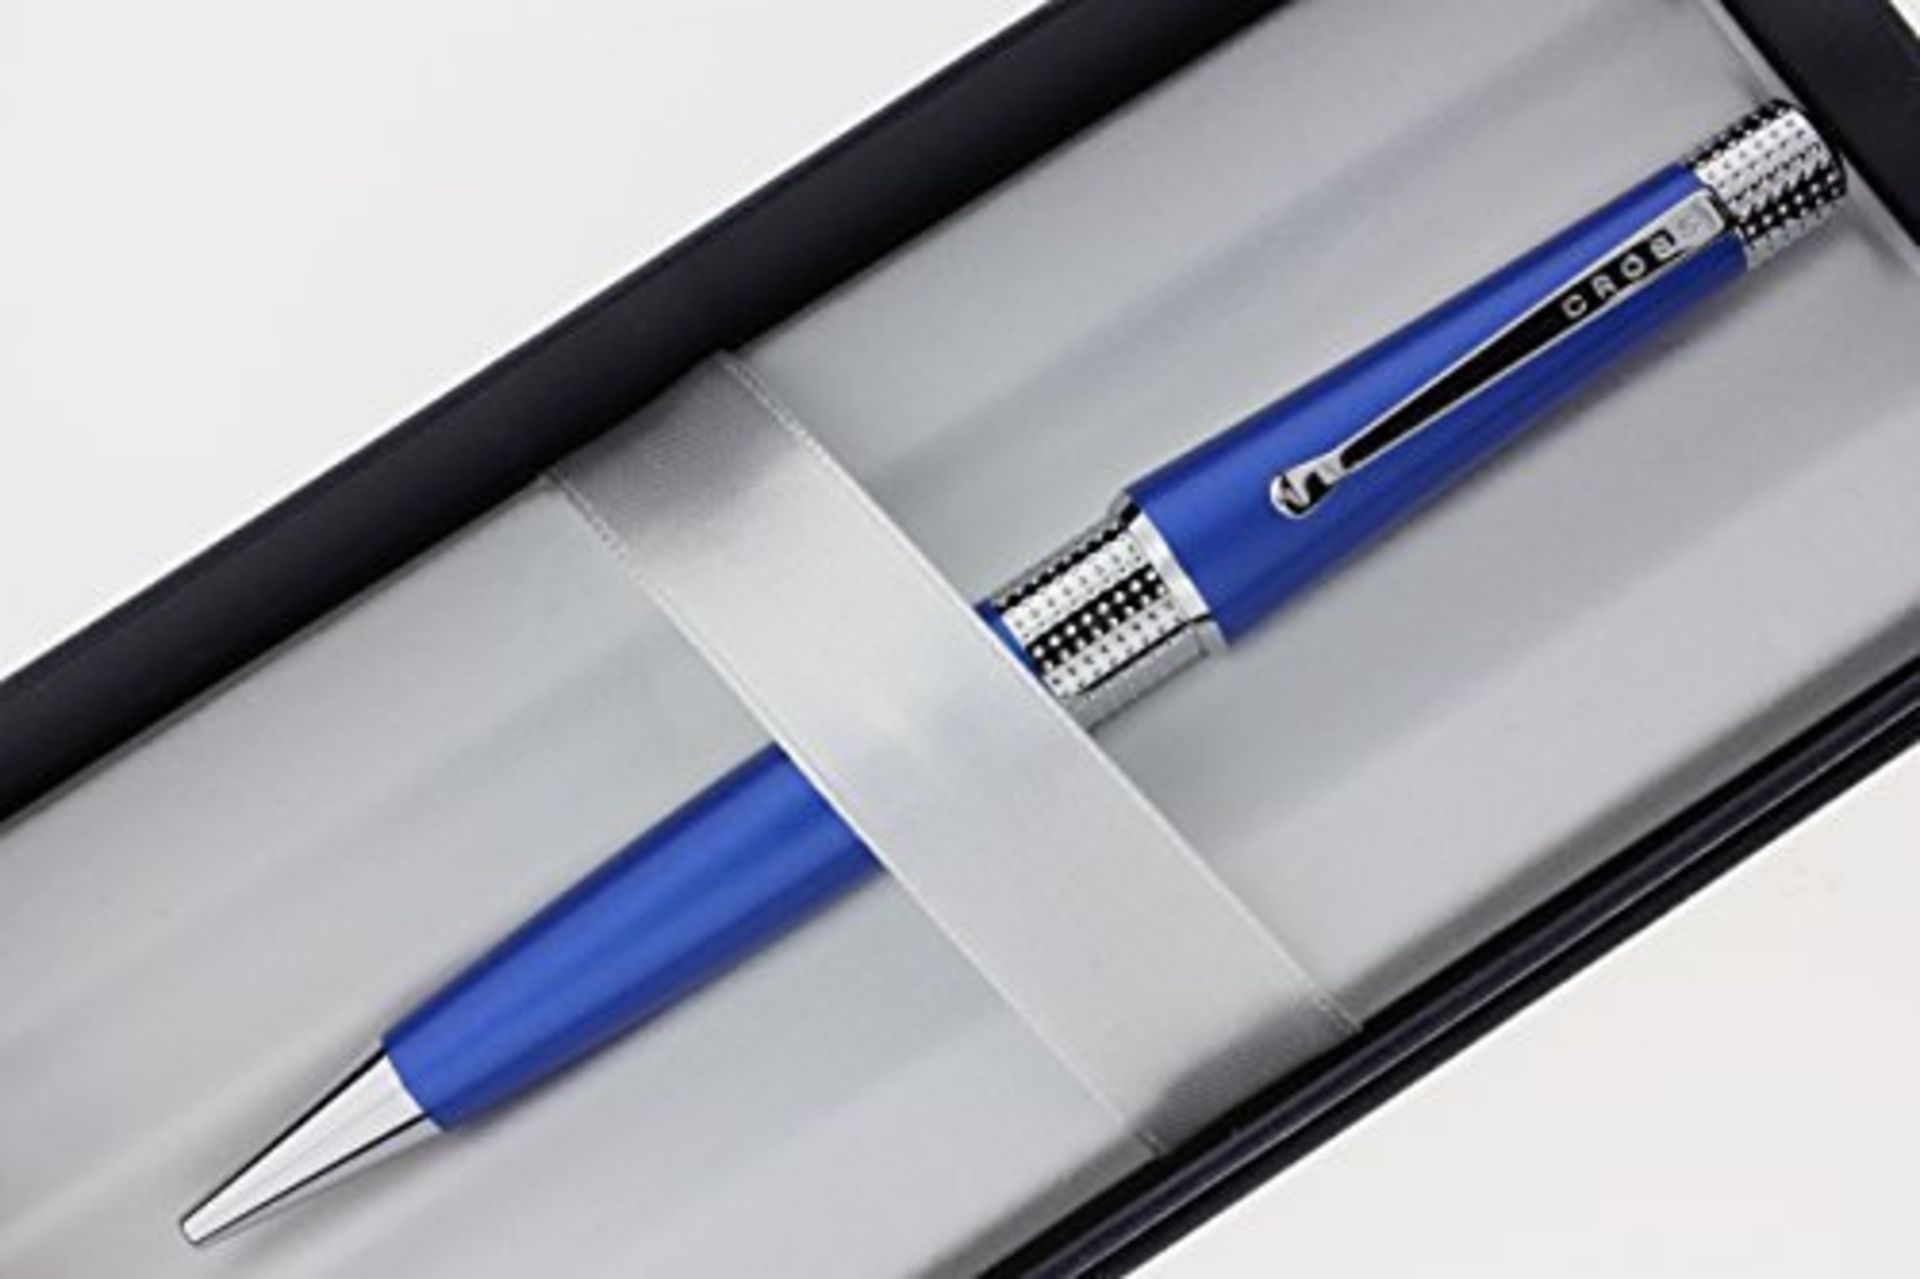 V Brand New Cross Beverly Blue and Chrome Ball Point Pen with Twist Retract Mechanism in Gift